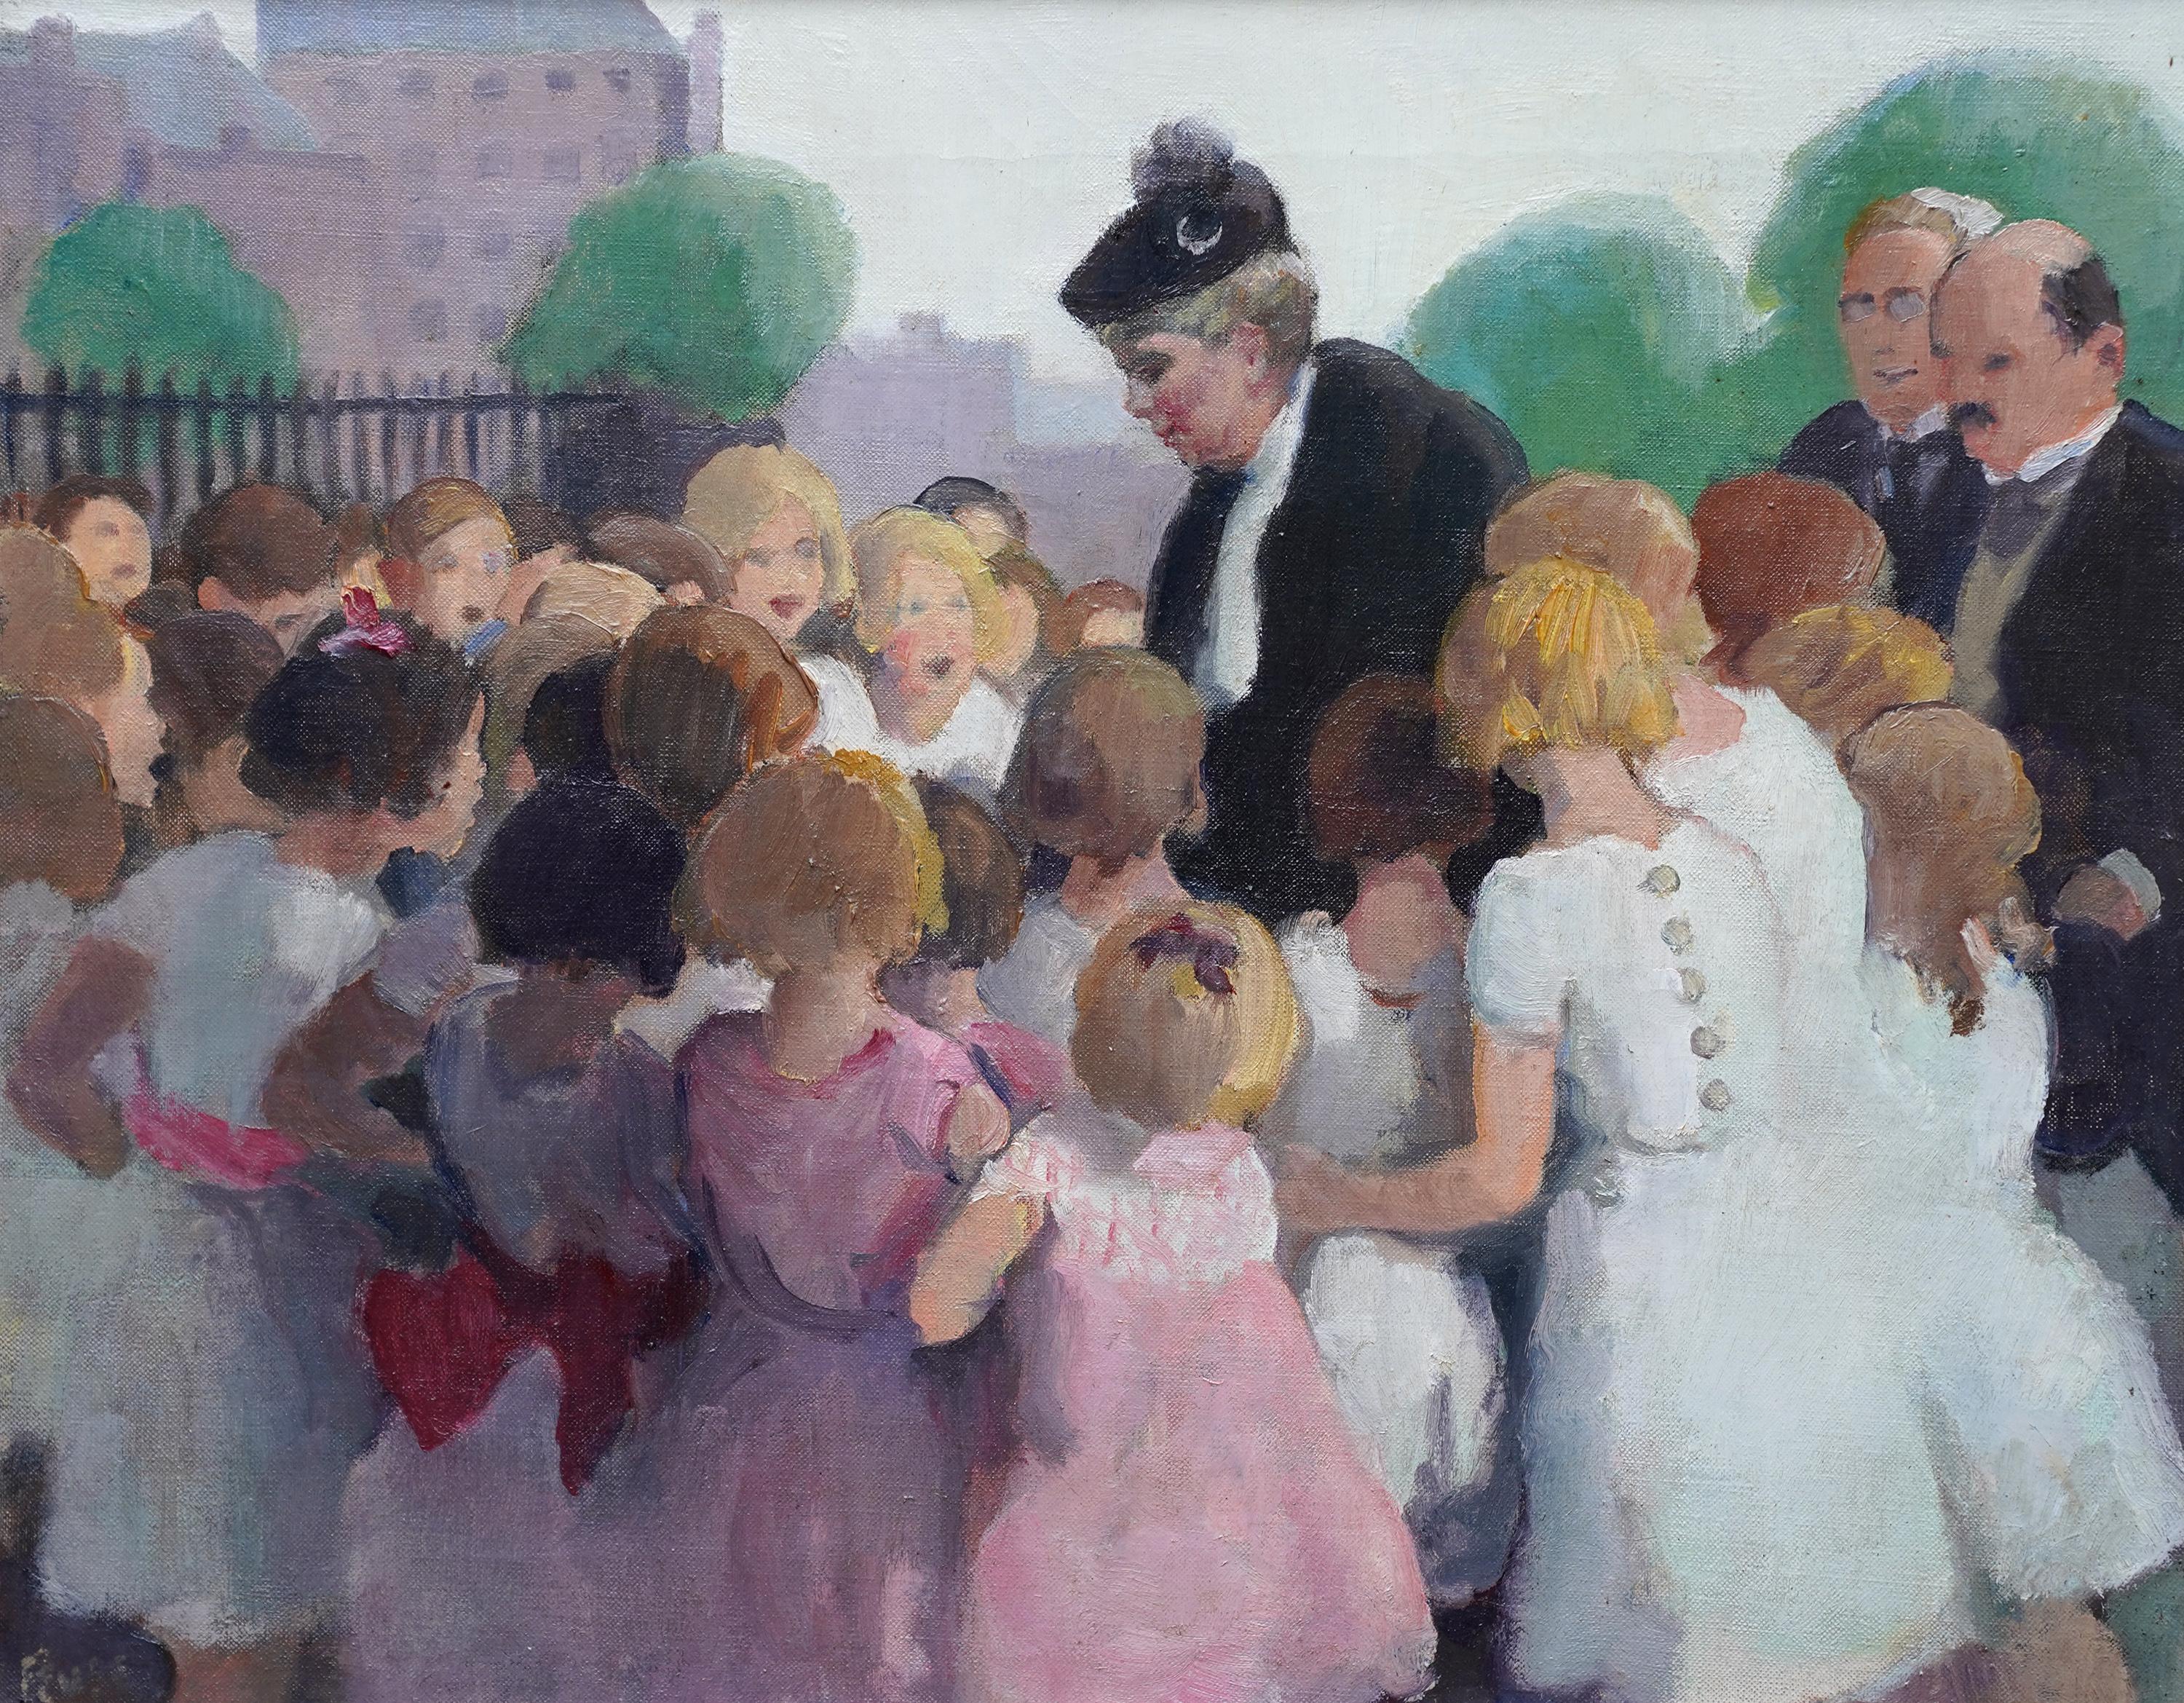 Queen Mary Greeting School Children - British 1910 royalty portrait oil painting For Sale 2